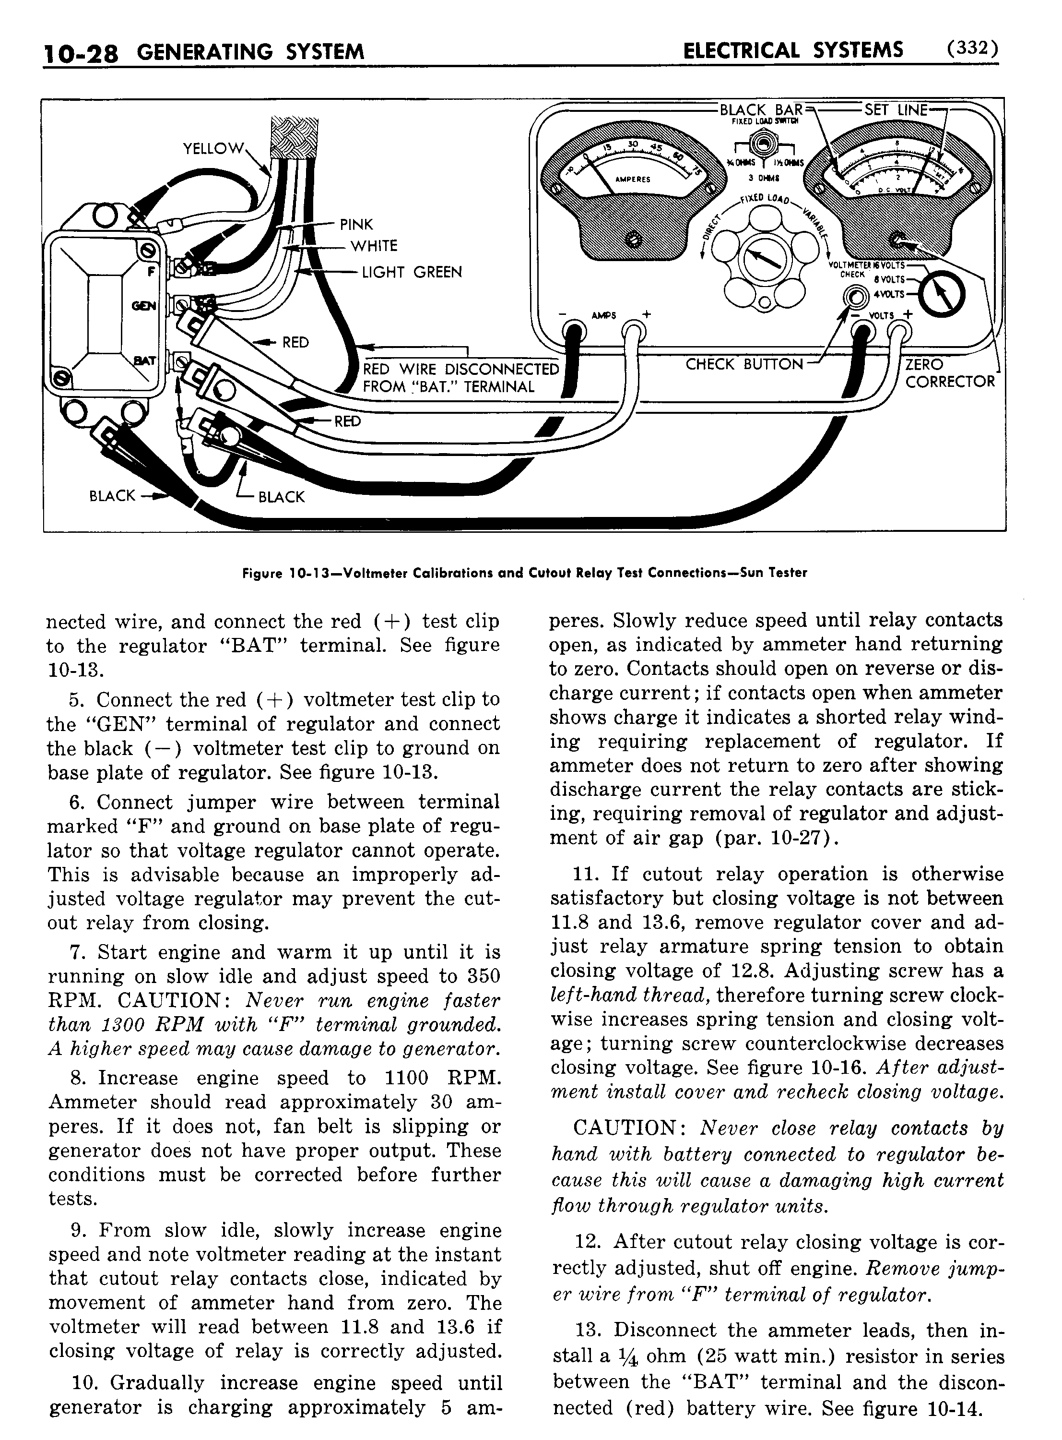 n_11 1955 Buick Shop Manual - Electrical Systems-028-028.jpg